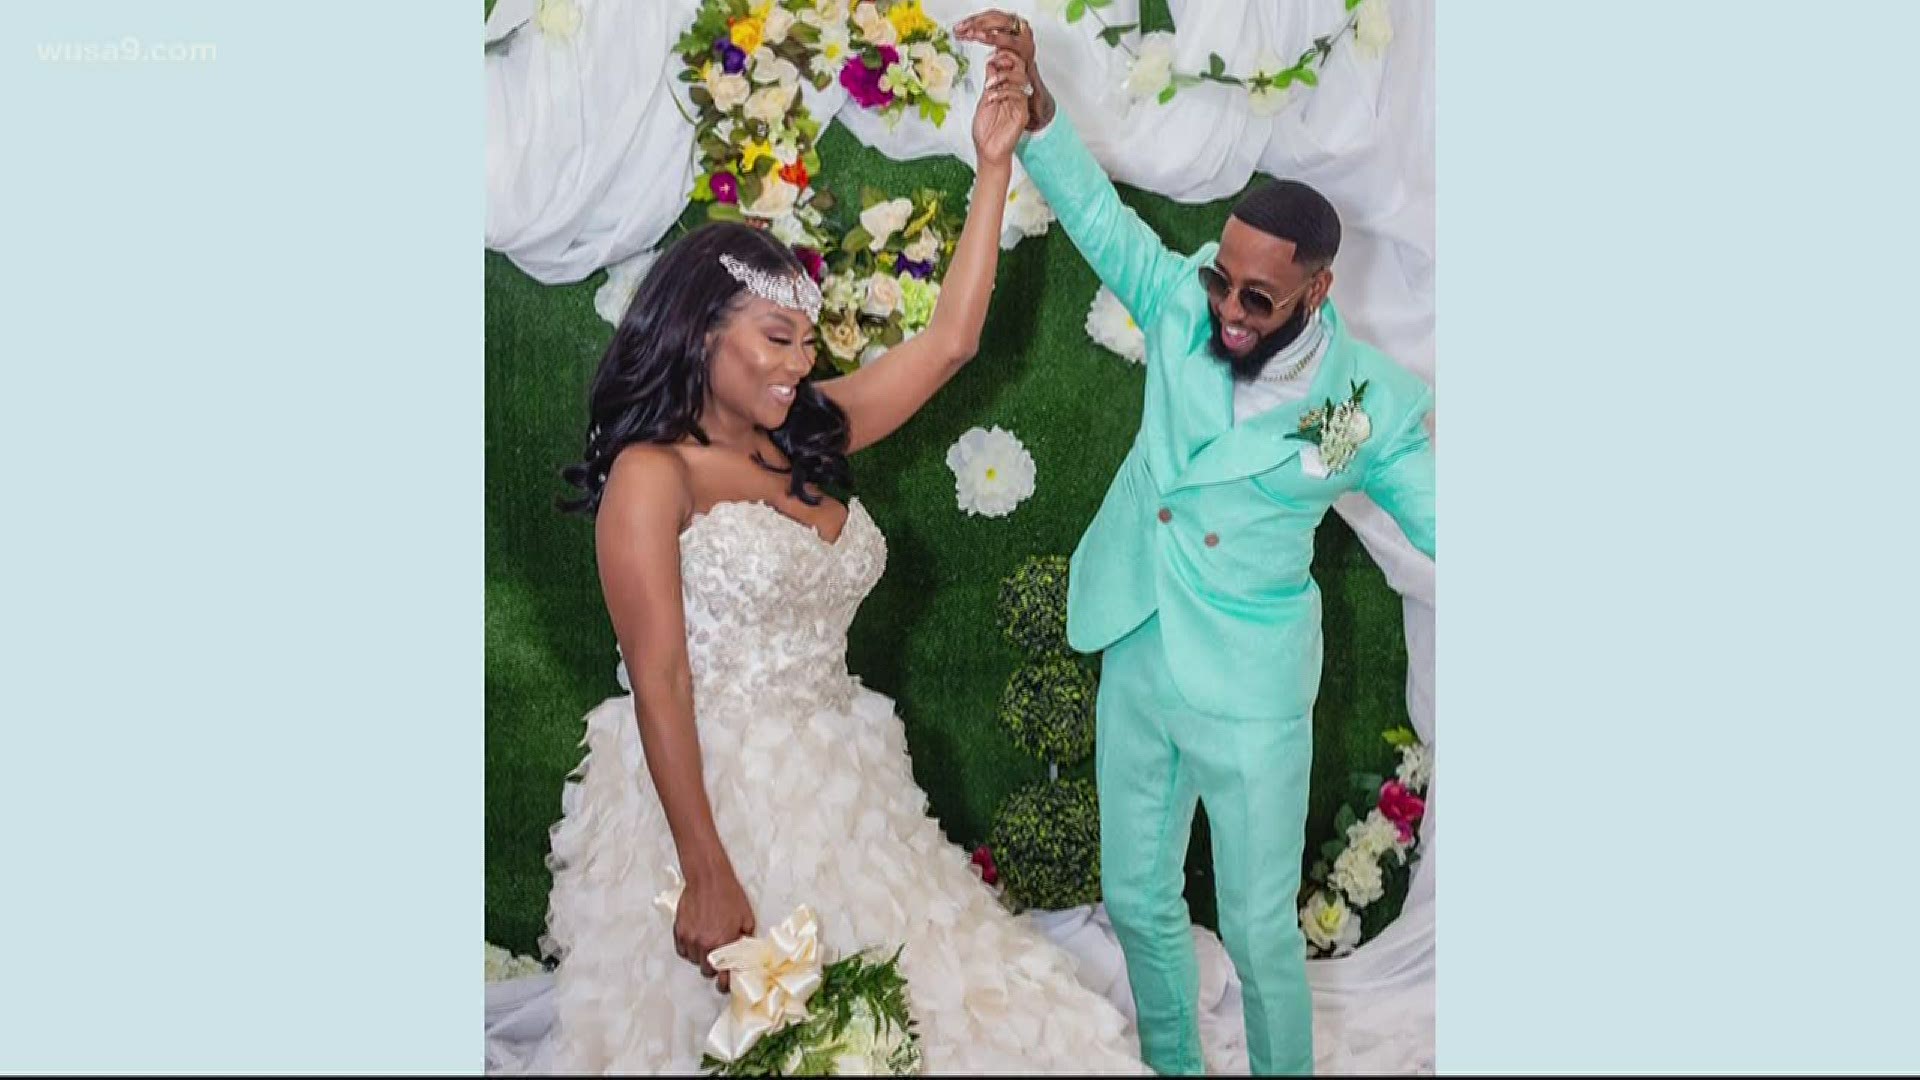 Two Maryland stylists planned their wedding in 10 days and streamed the ceremony live on Zoom, Instagram, YouTube and Facebook.